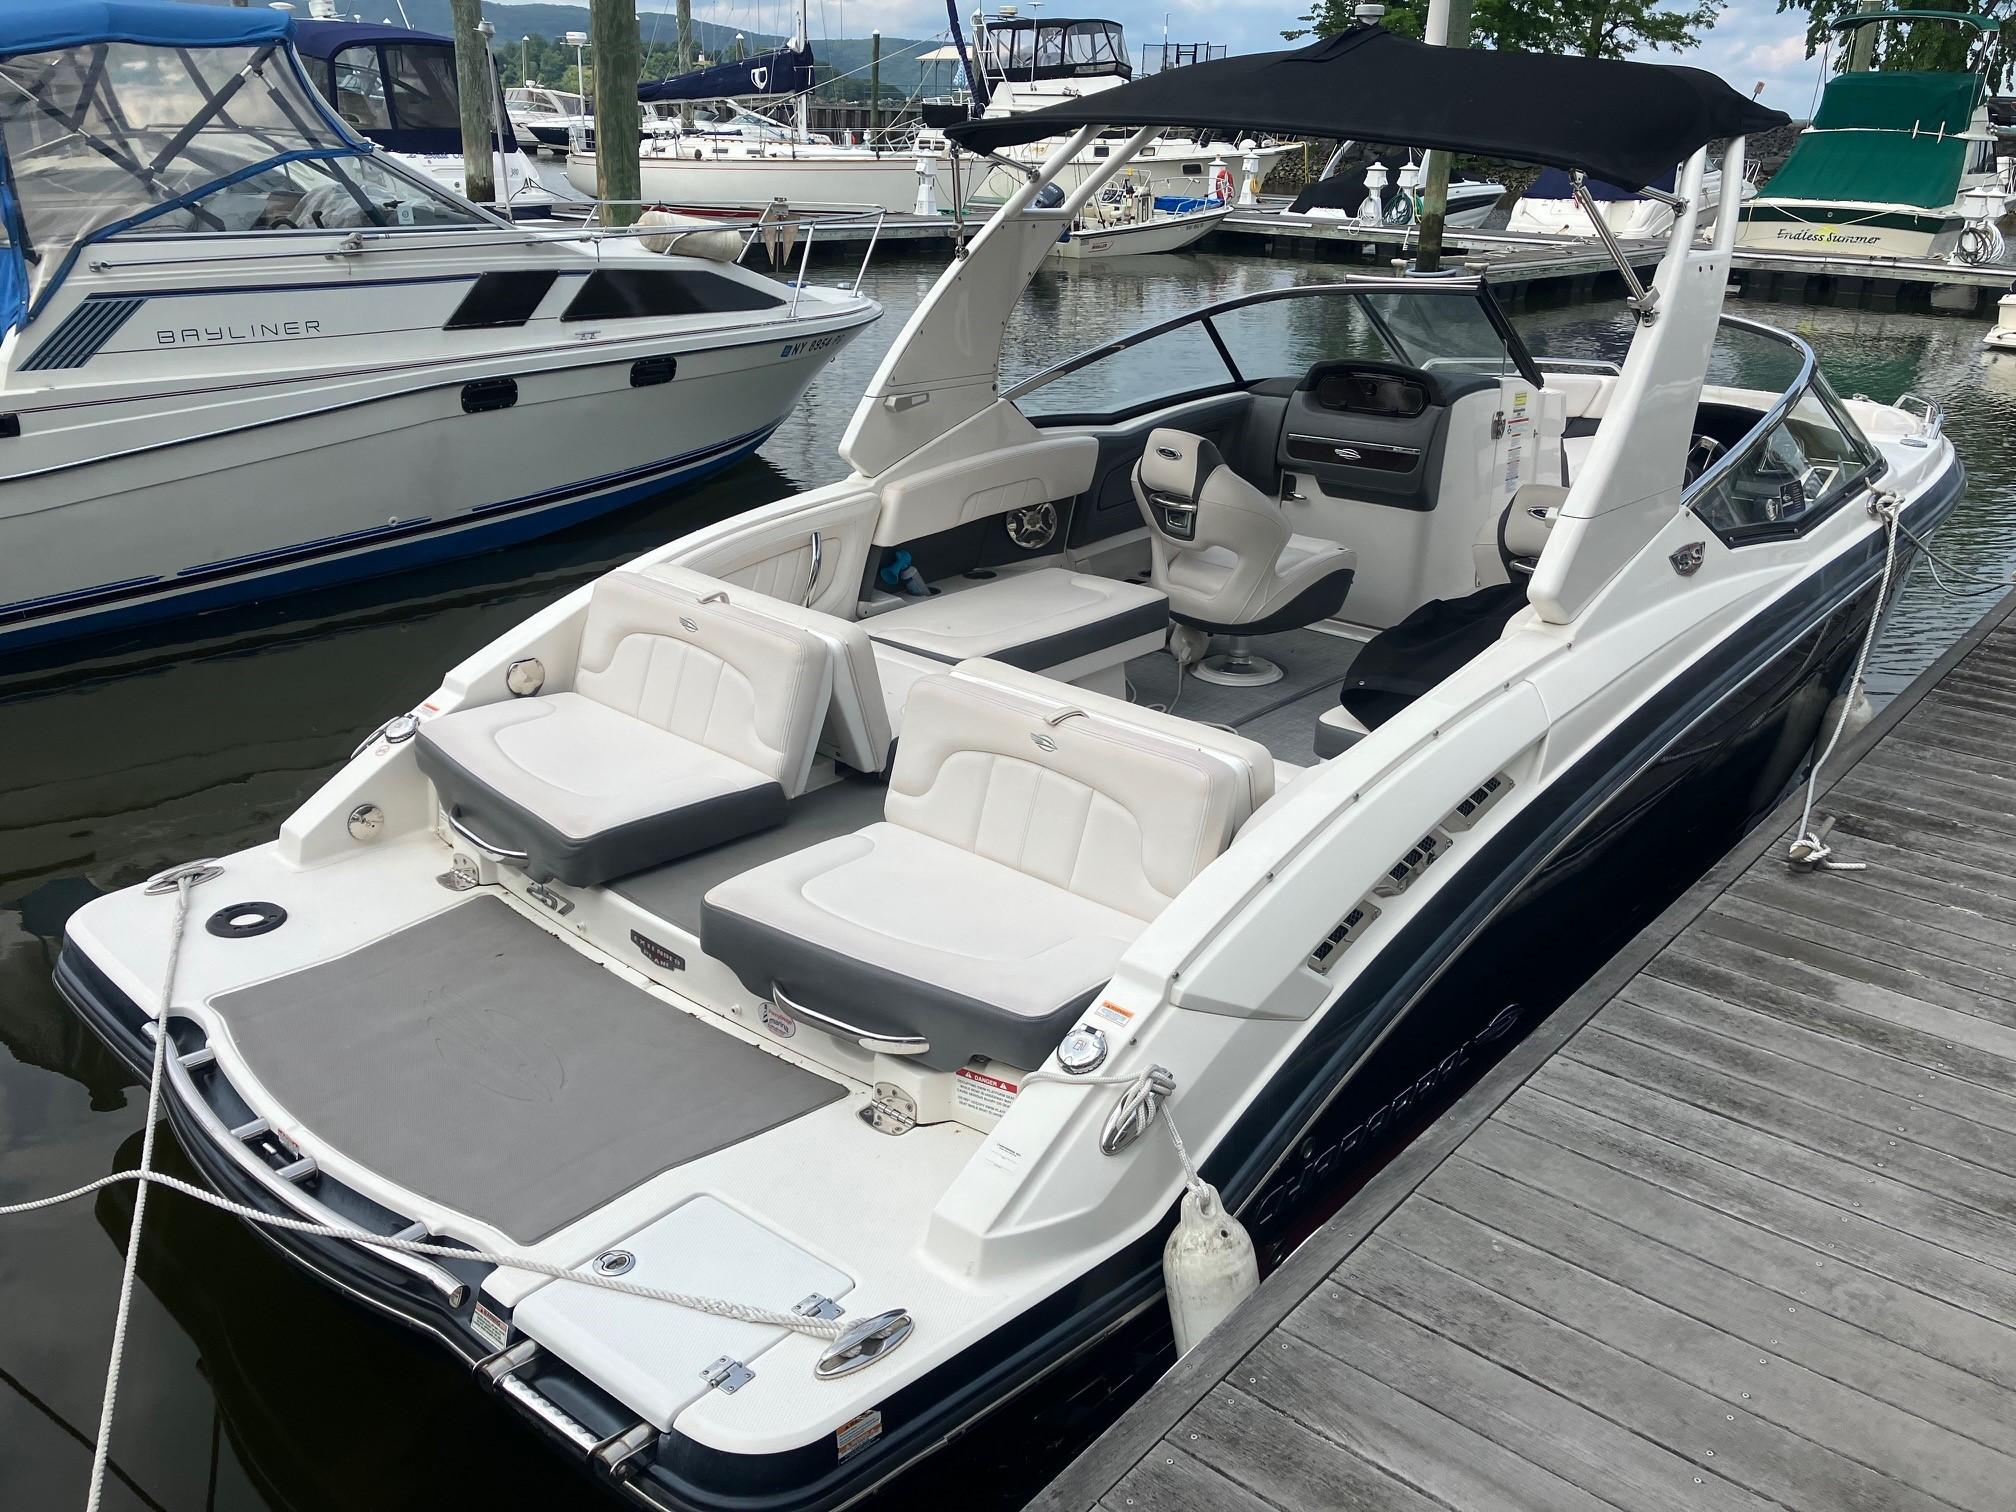 2016 Chaparral 257 SSX Bowrider for sale - YachtWorld